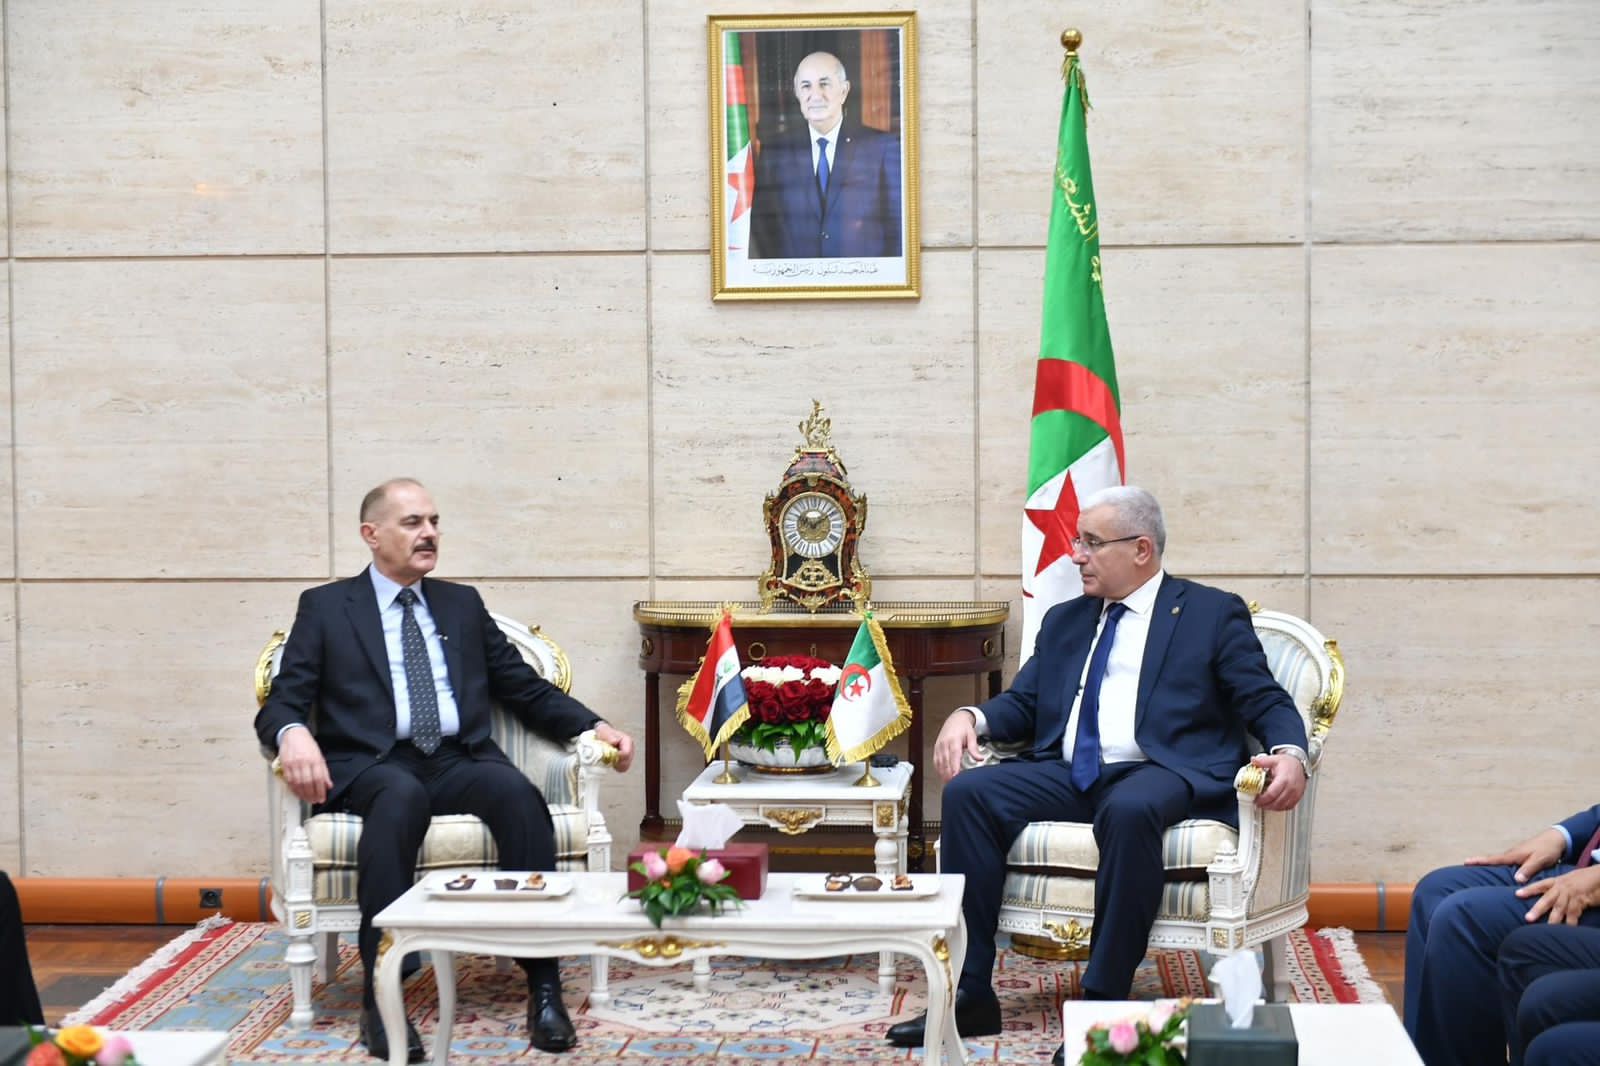 The Speaker of the Algerian People's Assembly receives the President of the Federal Supreme Court and his accompanying delegation